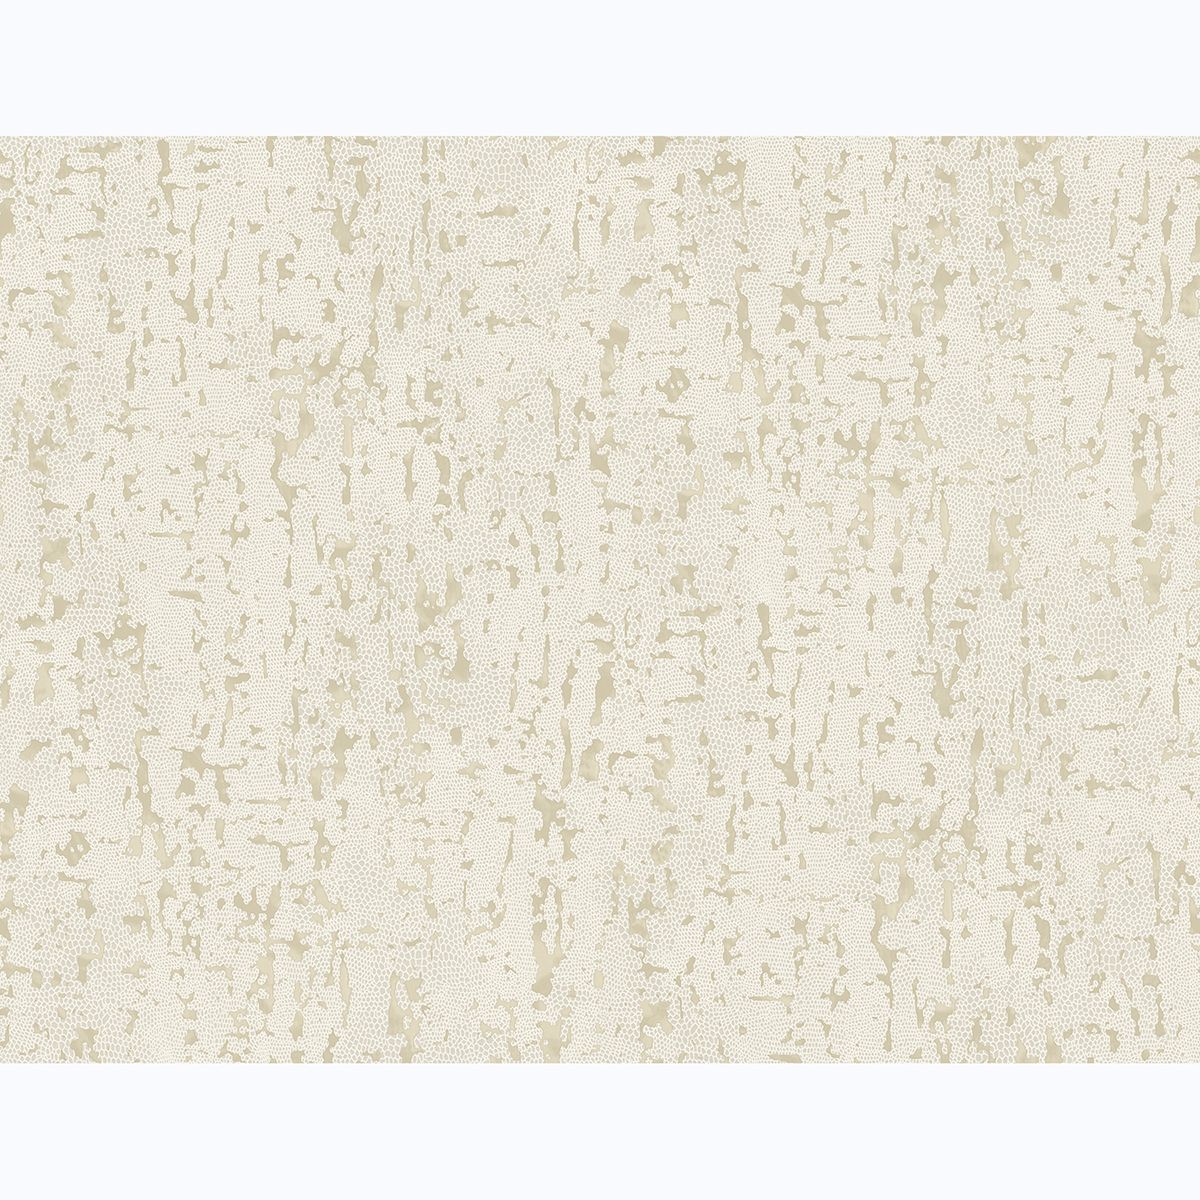 Brewster Wallcovering-Malawi Cream Leather Texture Wallpaper